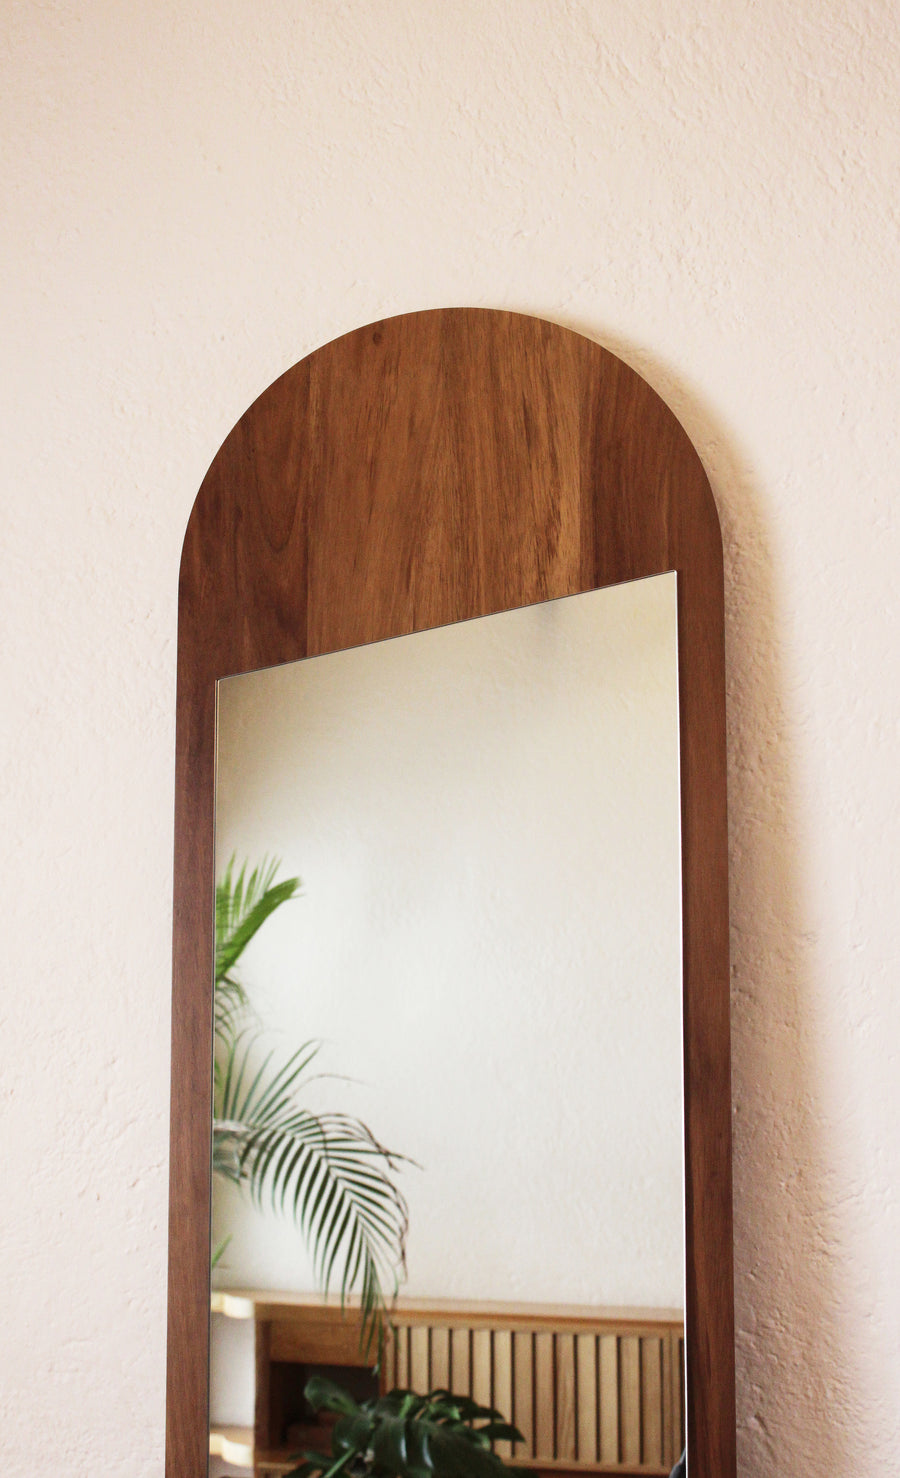 Tall contemporary designer standing mirror by Mexico based designer Maria Beckmann. Represented by collectible design Gallery Tuleste Factory in New York City.